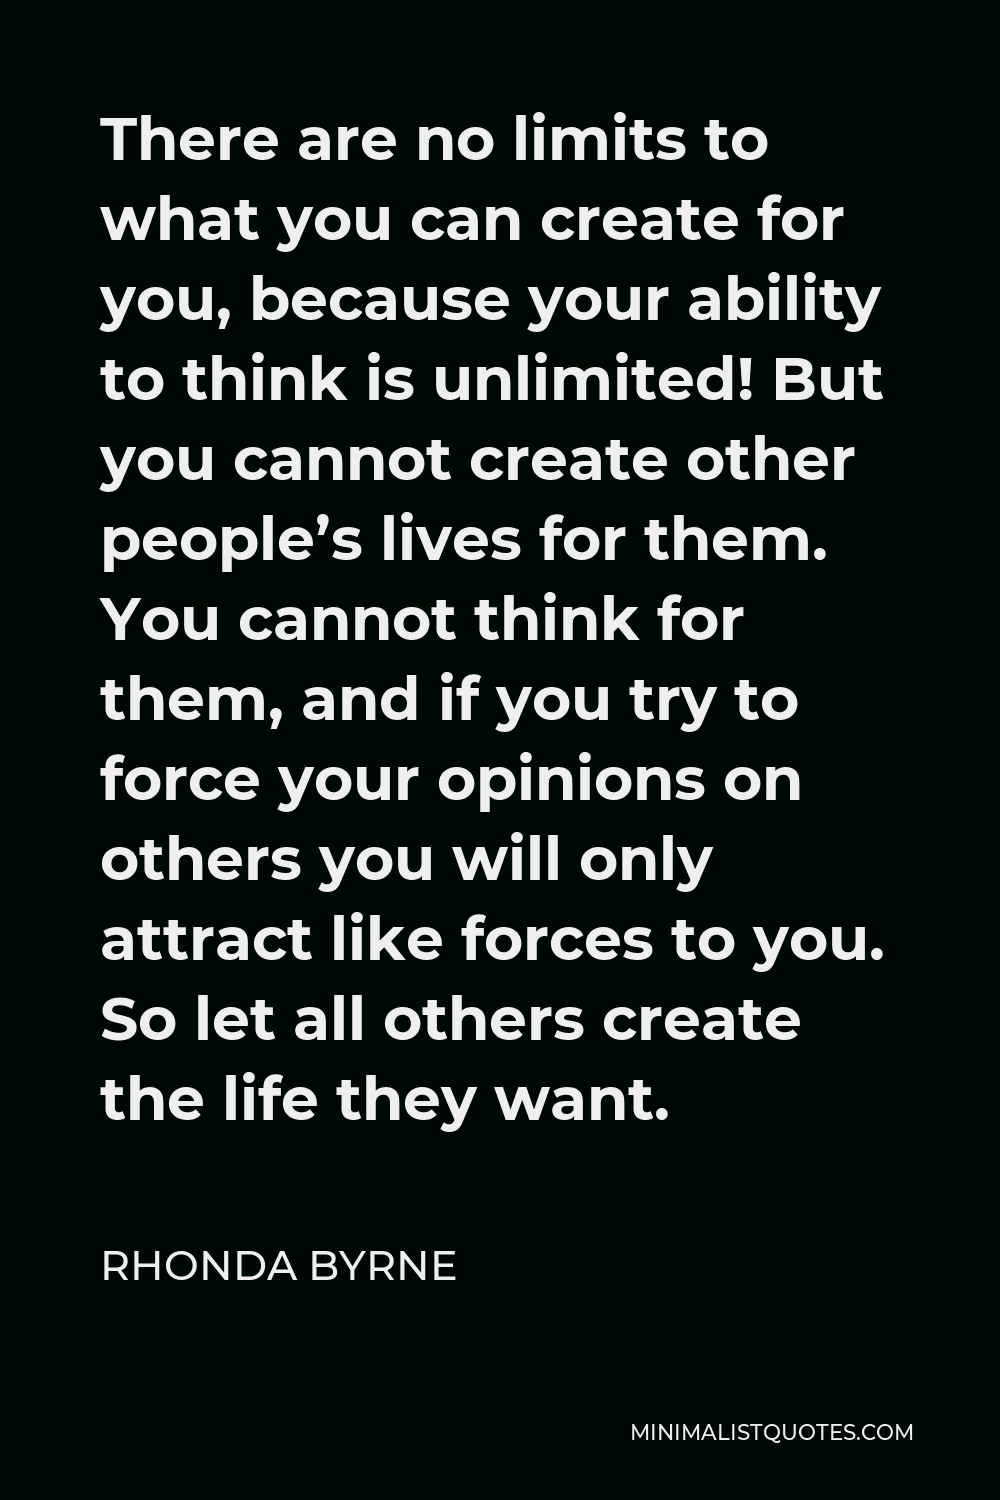 Rhonda Byrne Quote - There are no limits to what you can create for you, because your ability to think is unlimited! But you cannot create other people’s lives for them. You cannot think for them, and if you try to force your opinions on others you will only attract like forces to you. So let all others create the life they want.